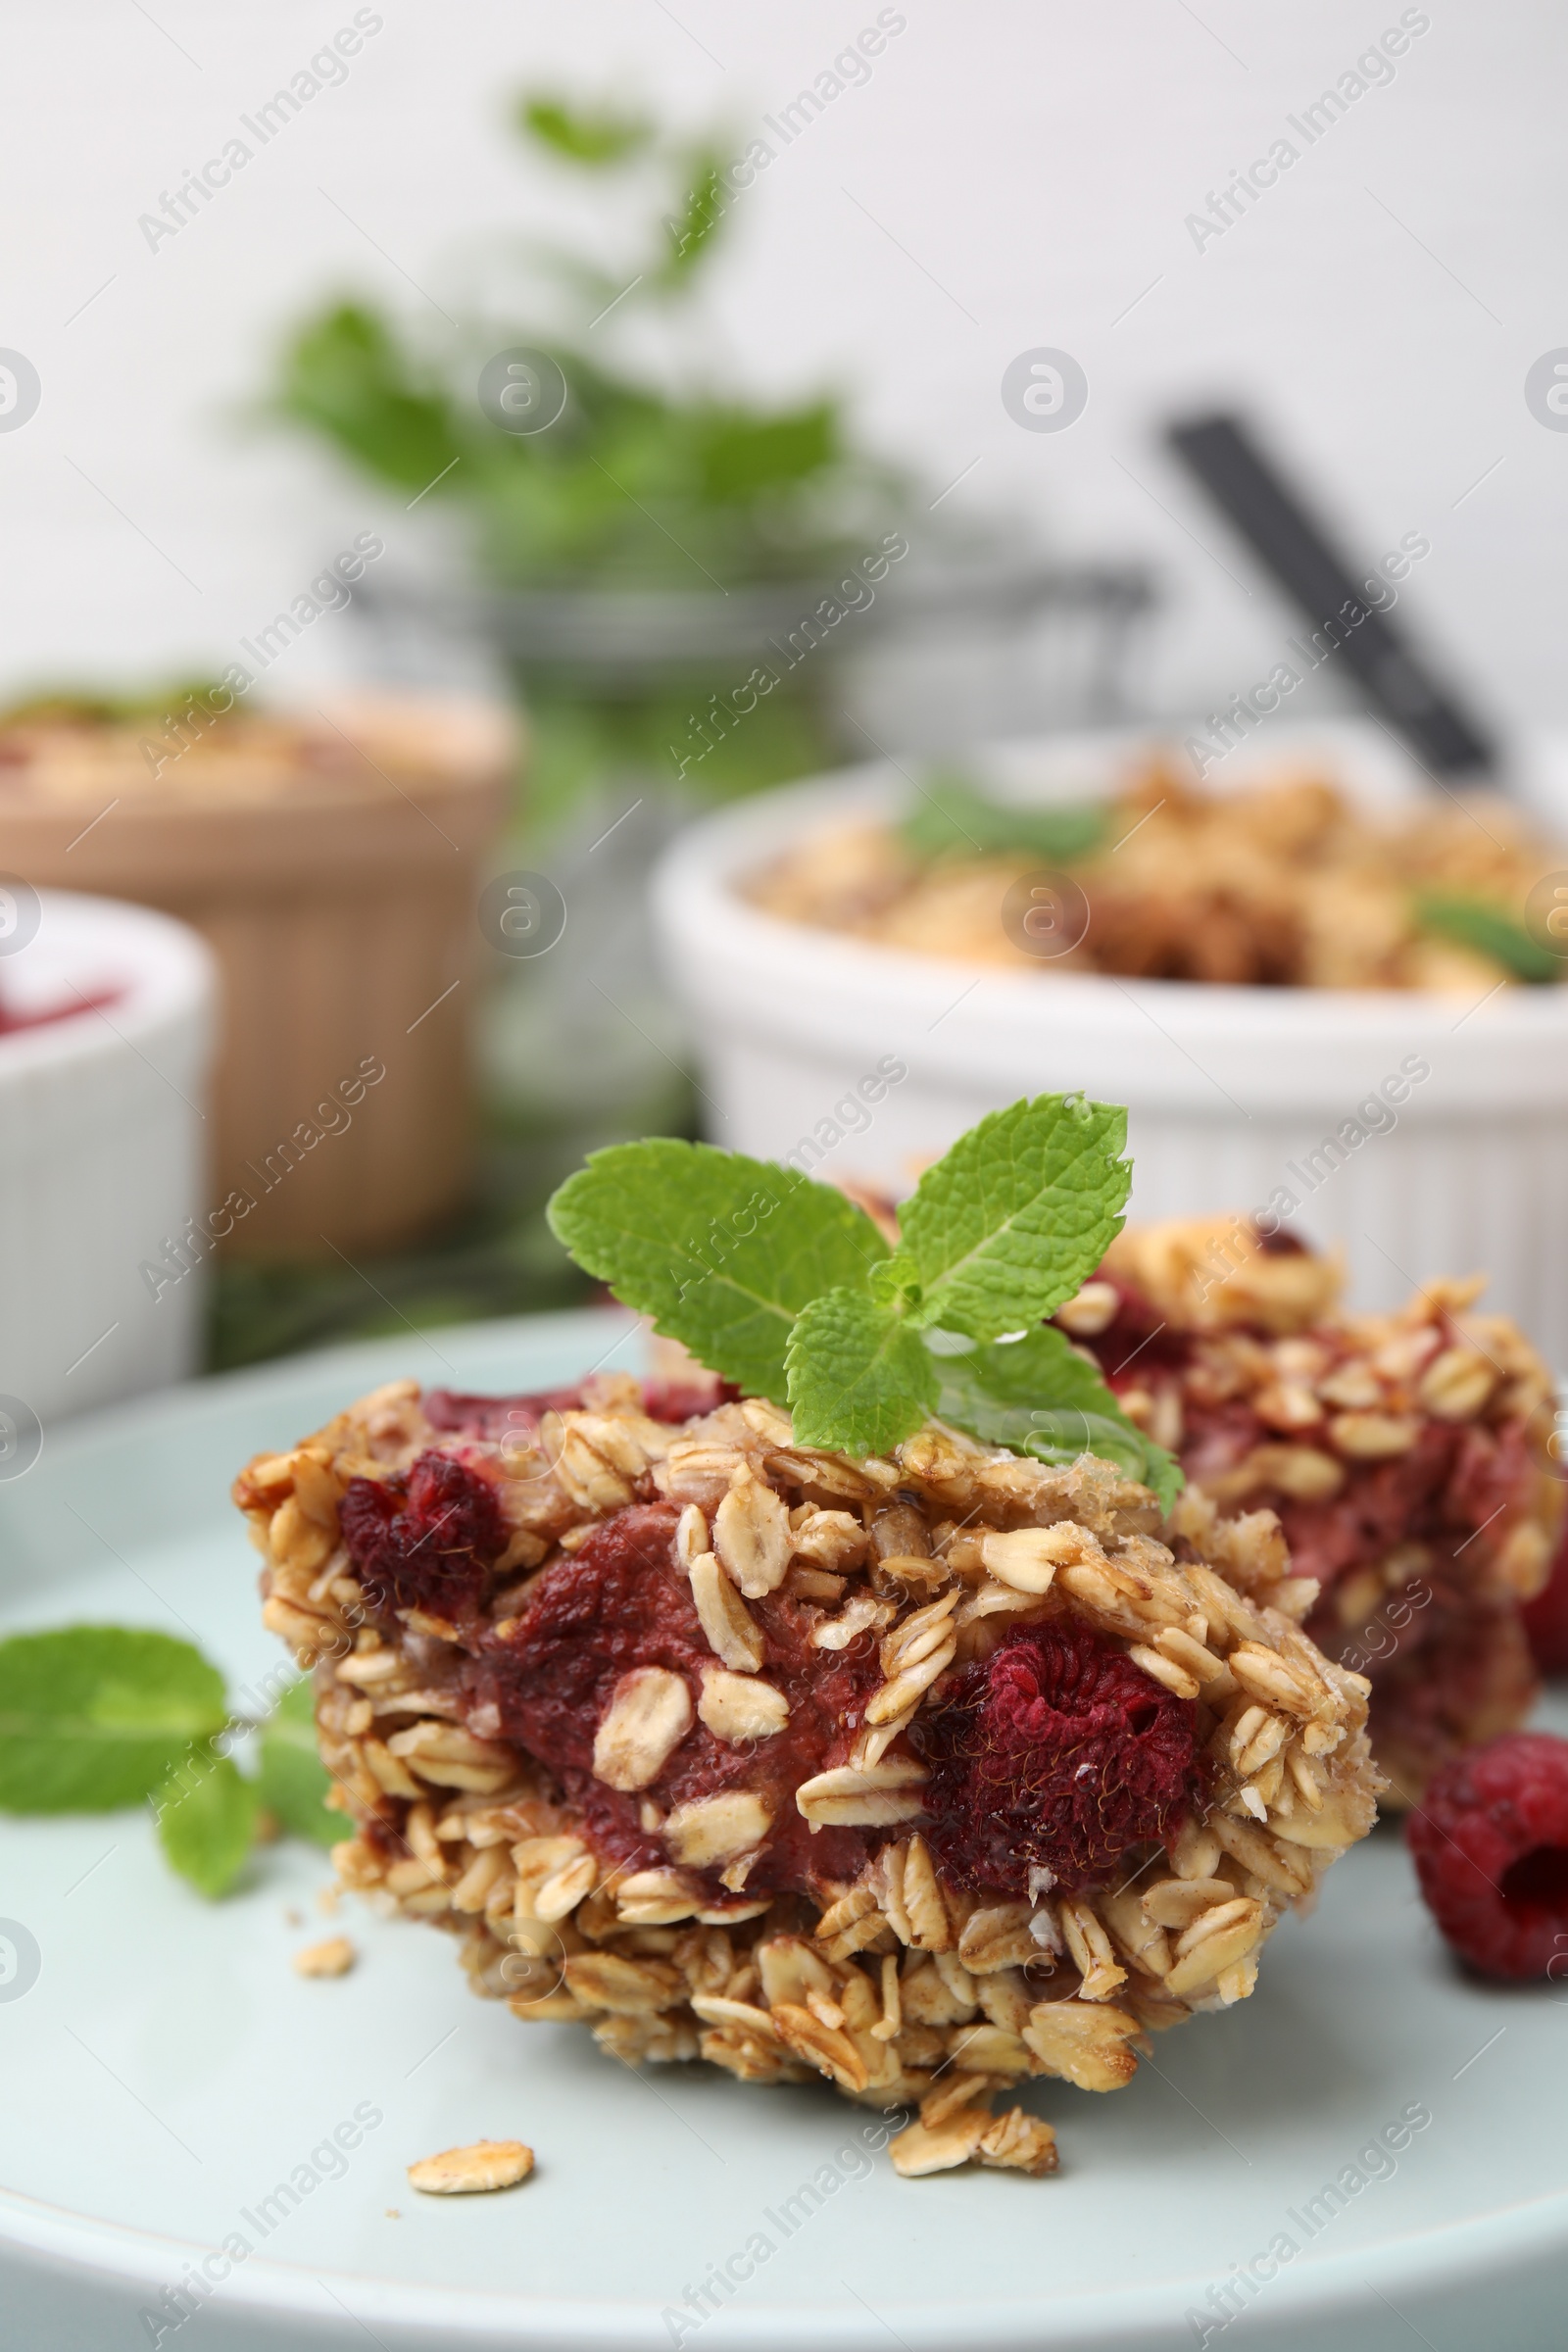 Photo of Tasty baked oatmeal with raspberries on table, closeup